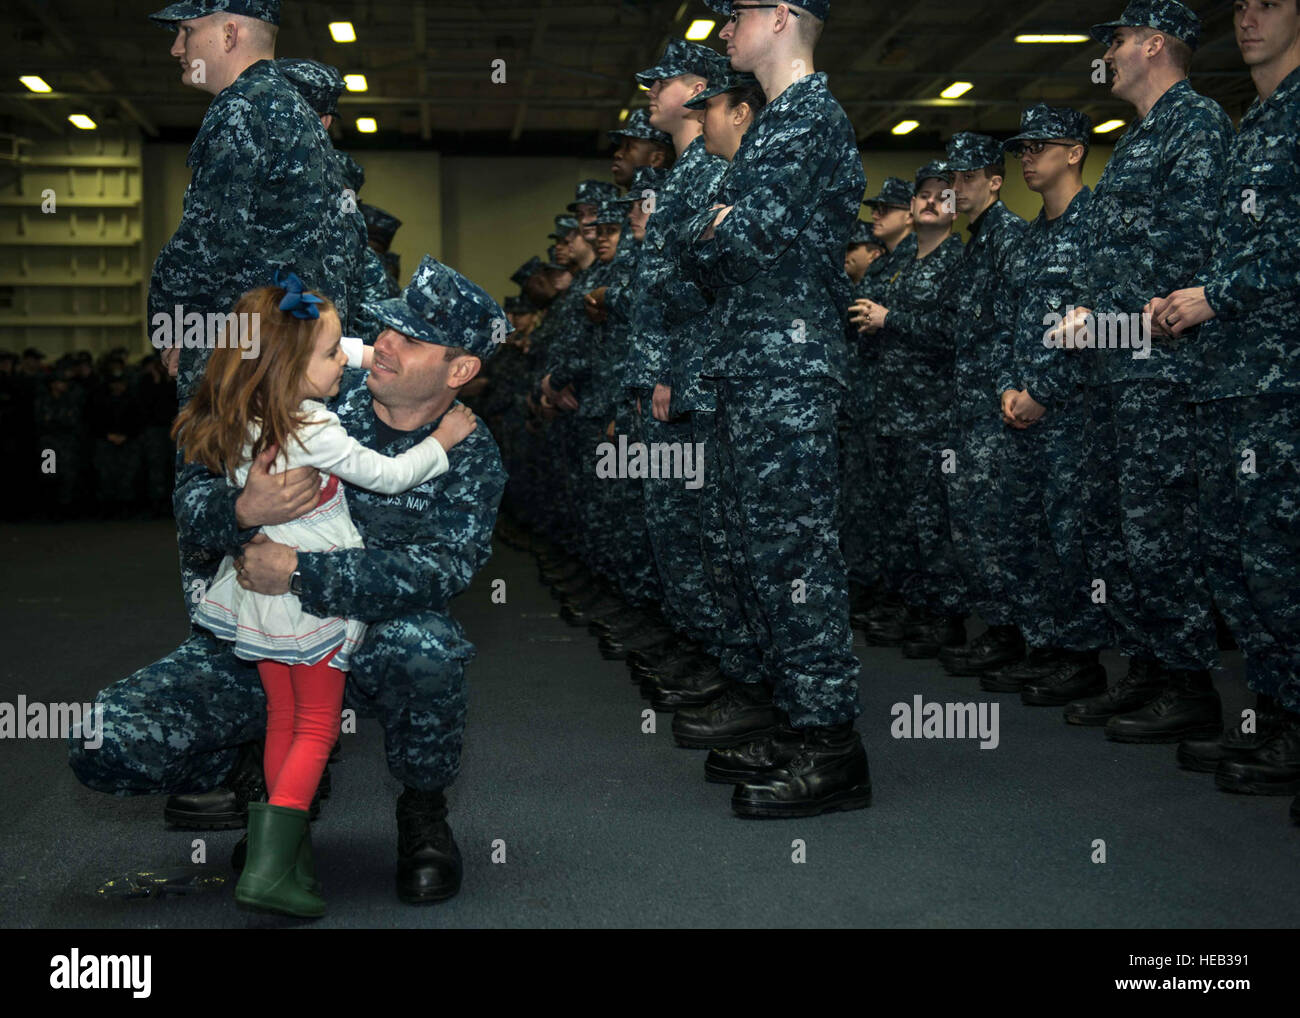 151209-N-BR087-012 BREMERTON, Wash. (Dec. 9, 2015) - Machinist's Mate 1st Class John Rasmussen, from Sacramento, Calif., hugs his daughter Lillian during a frocking ceremony in USS John C. Stennis' (CVN 74) hangar bay. Stennis' crew is currently in port training for future deployments.  Mass Communication Specialist Seaman Apprentice Cole C. Pielop Stock Photo